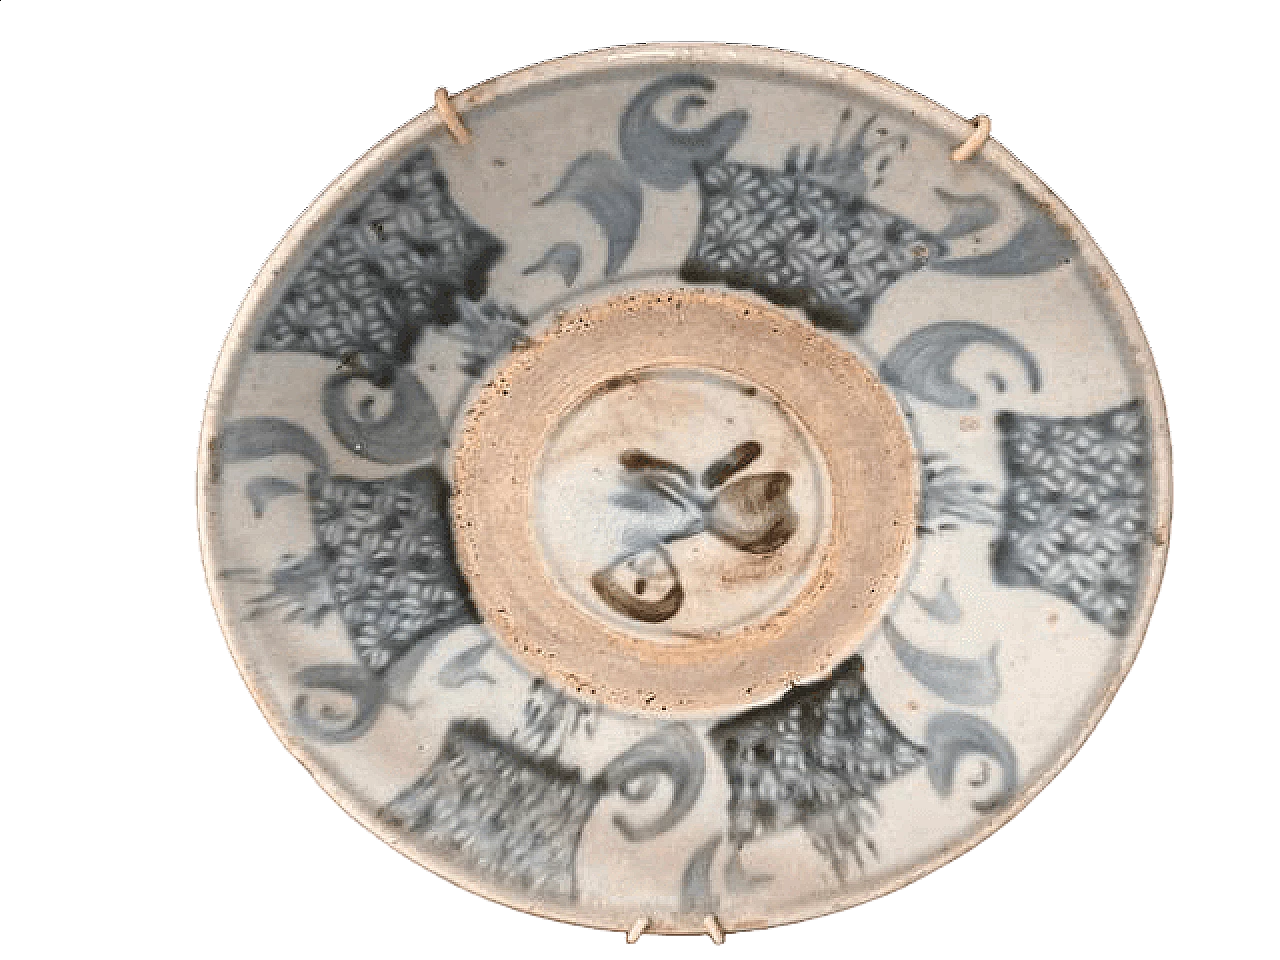 Ming dynasty Chinese porcelain plate, 18th century 10